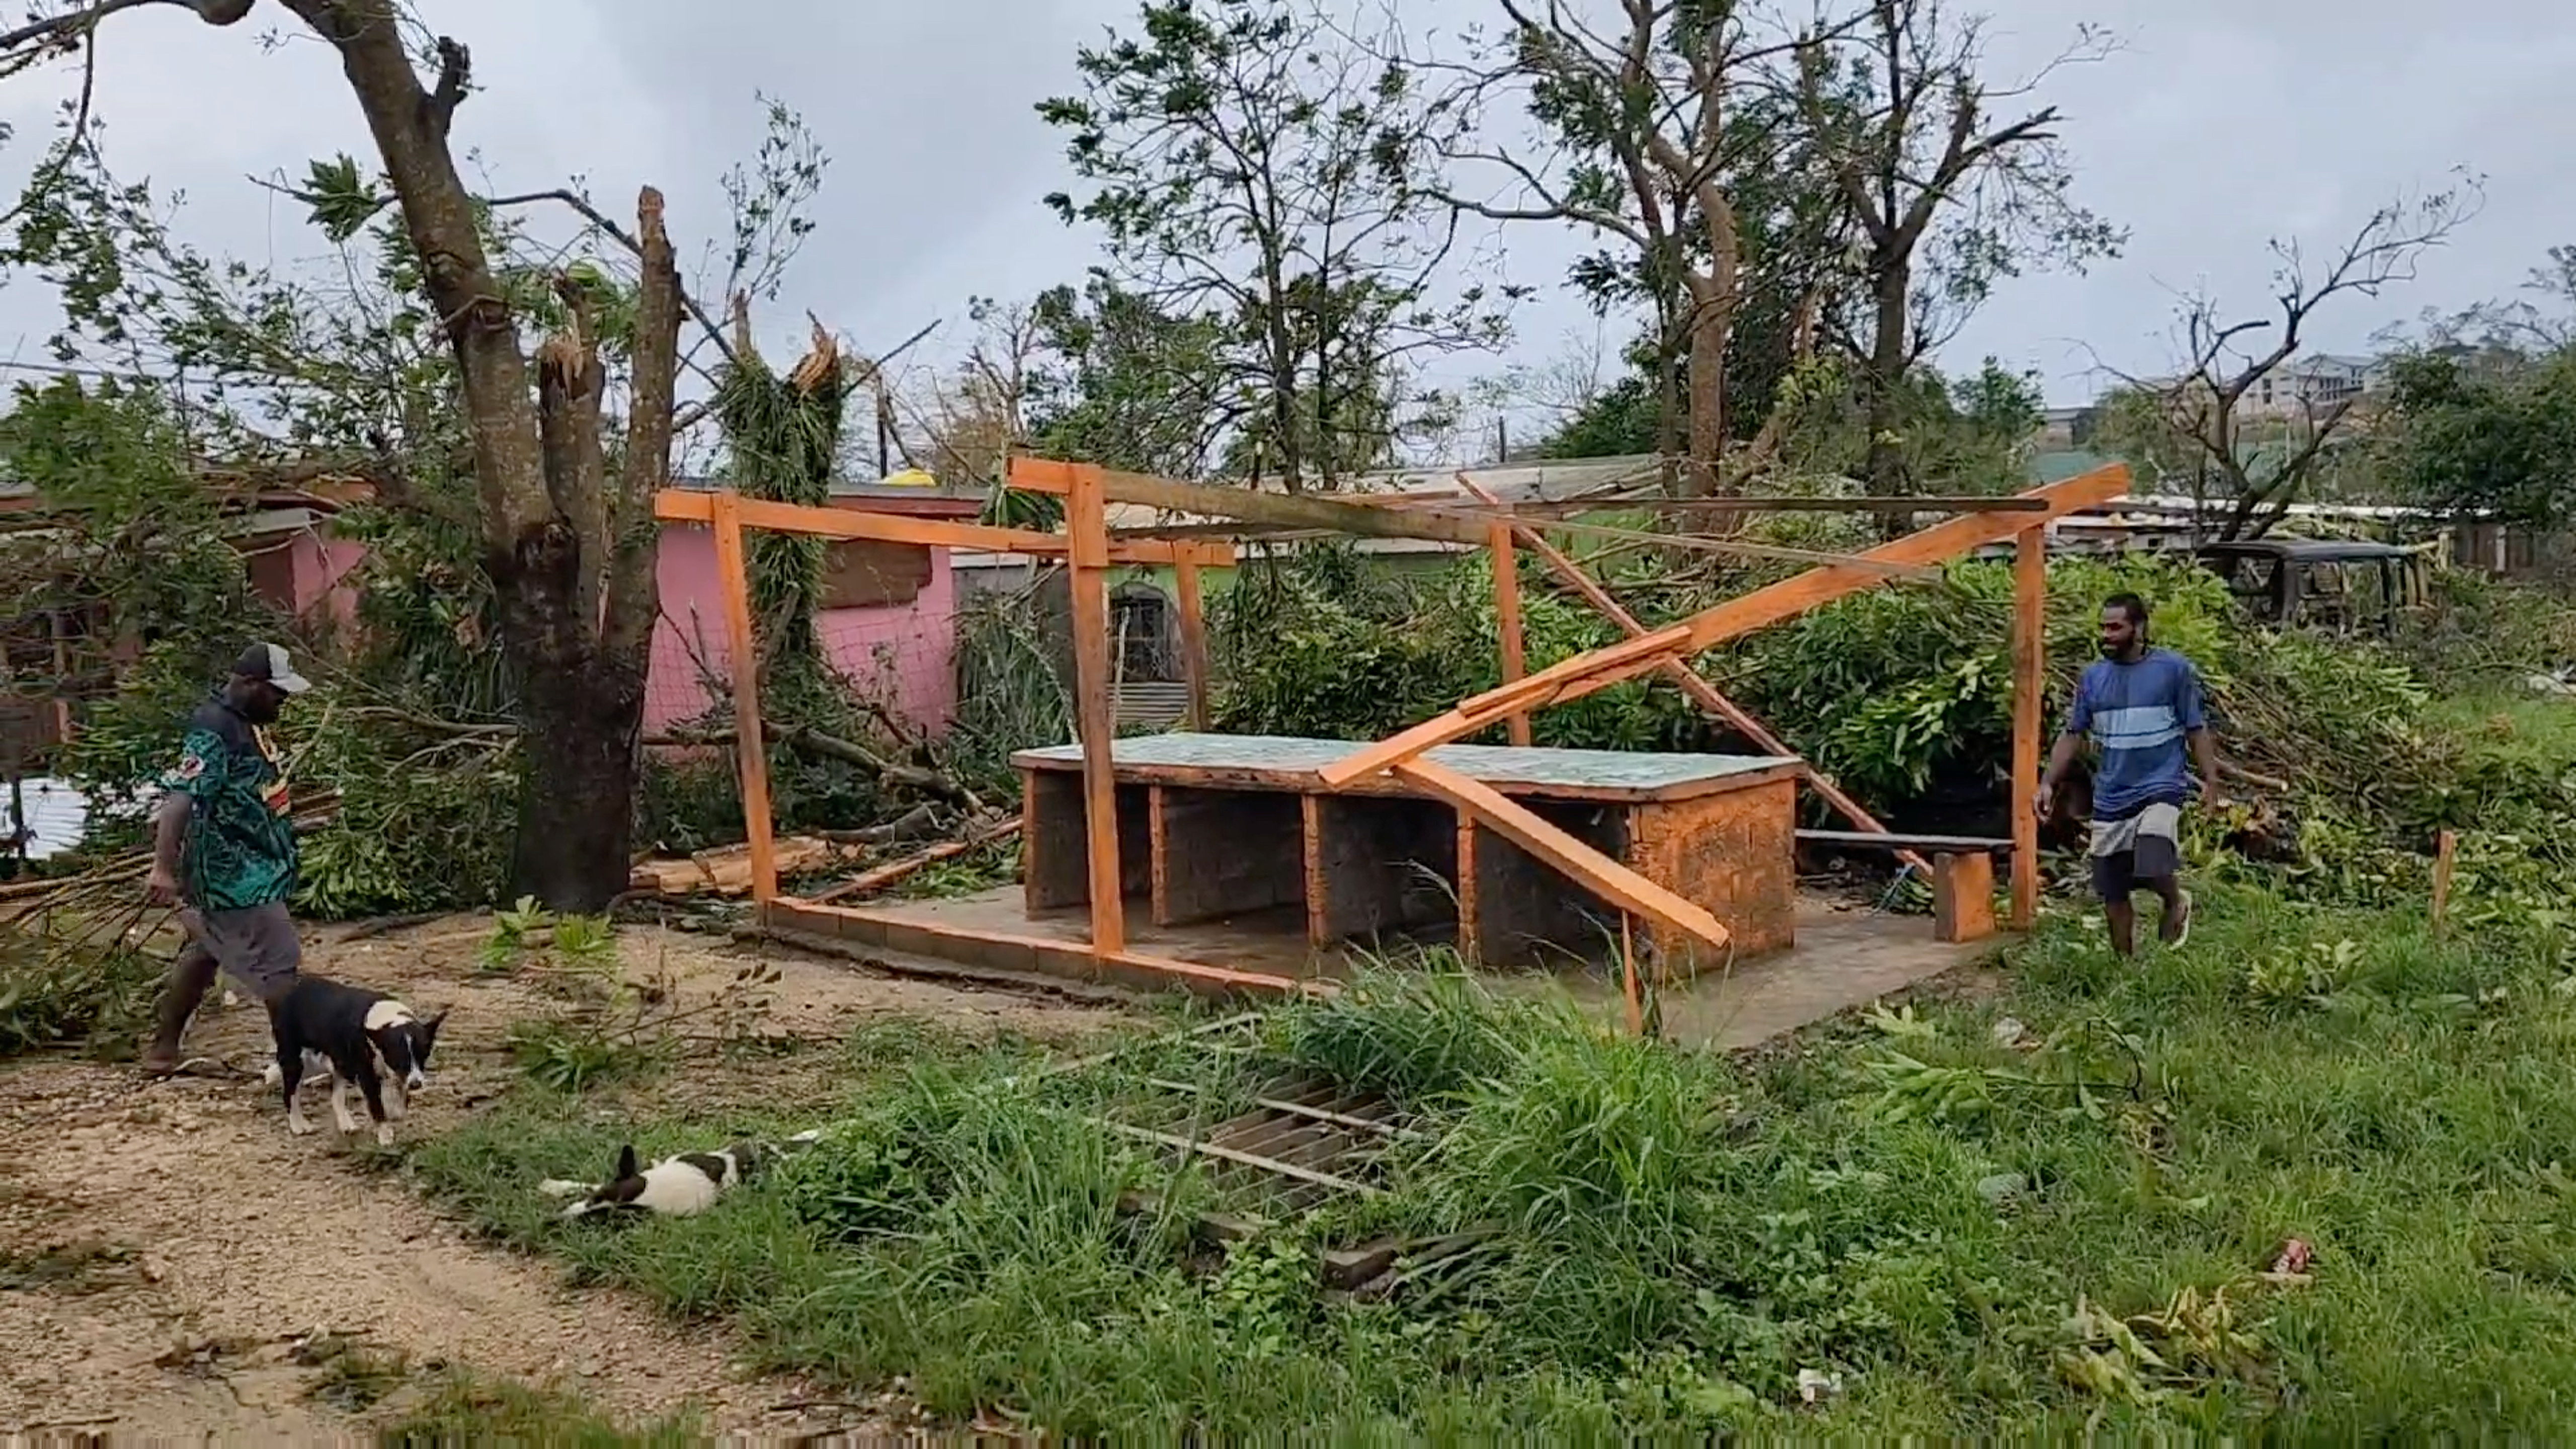 A view of the damage in the aftermath of cyclone Kevin, in Port Vila